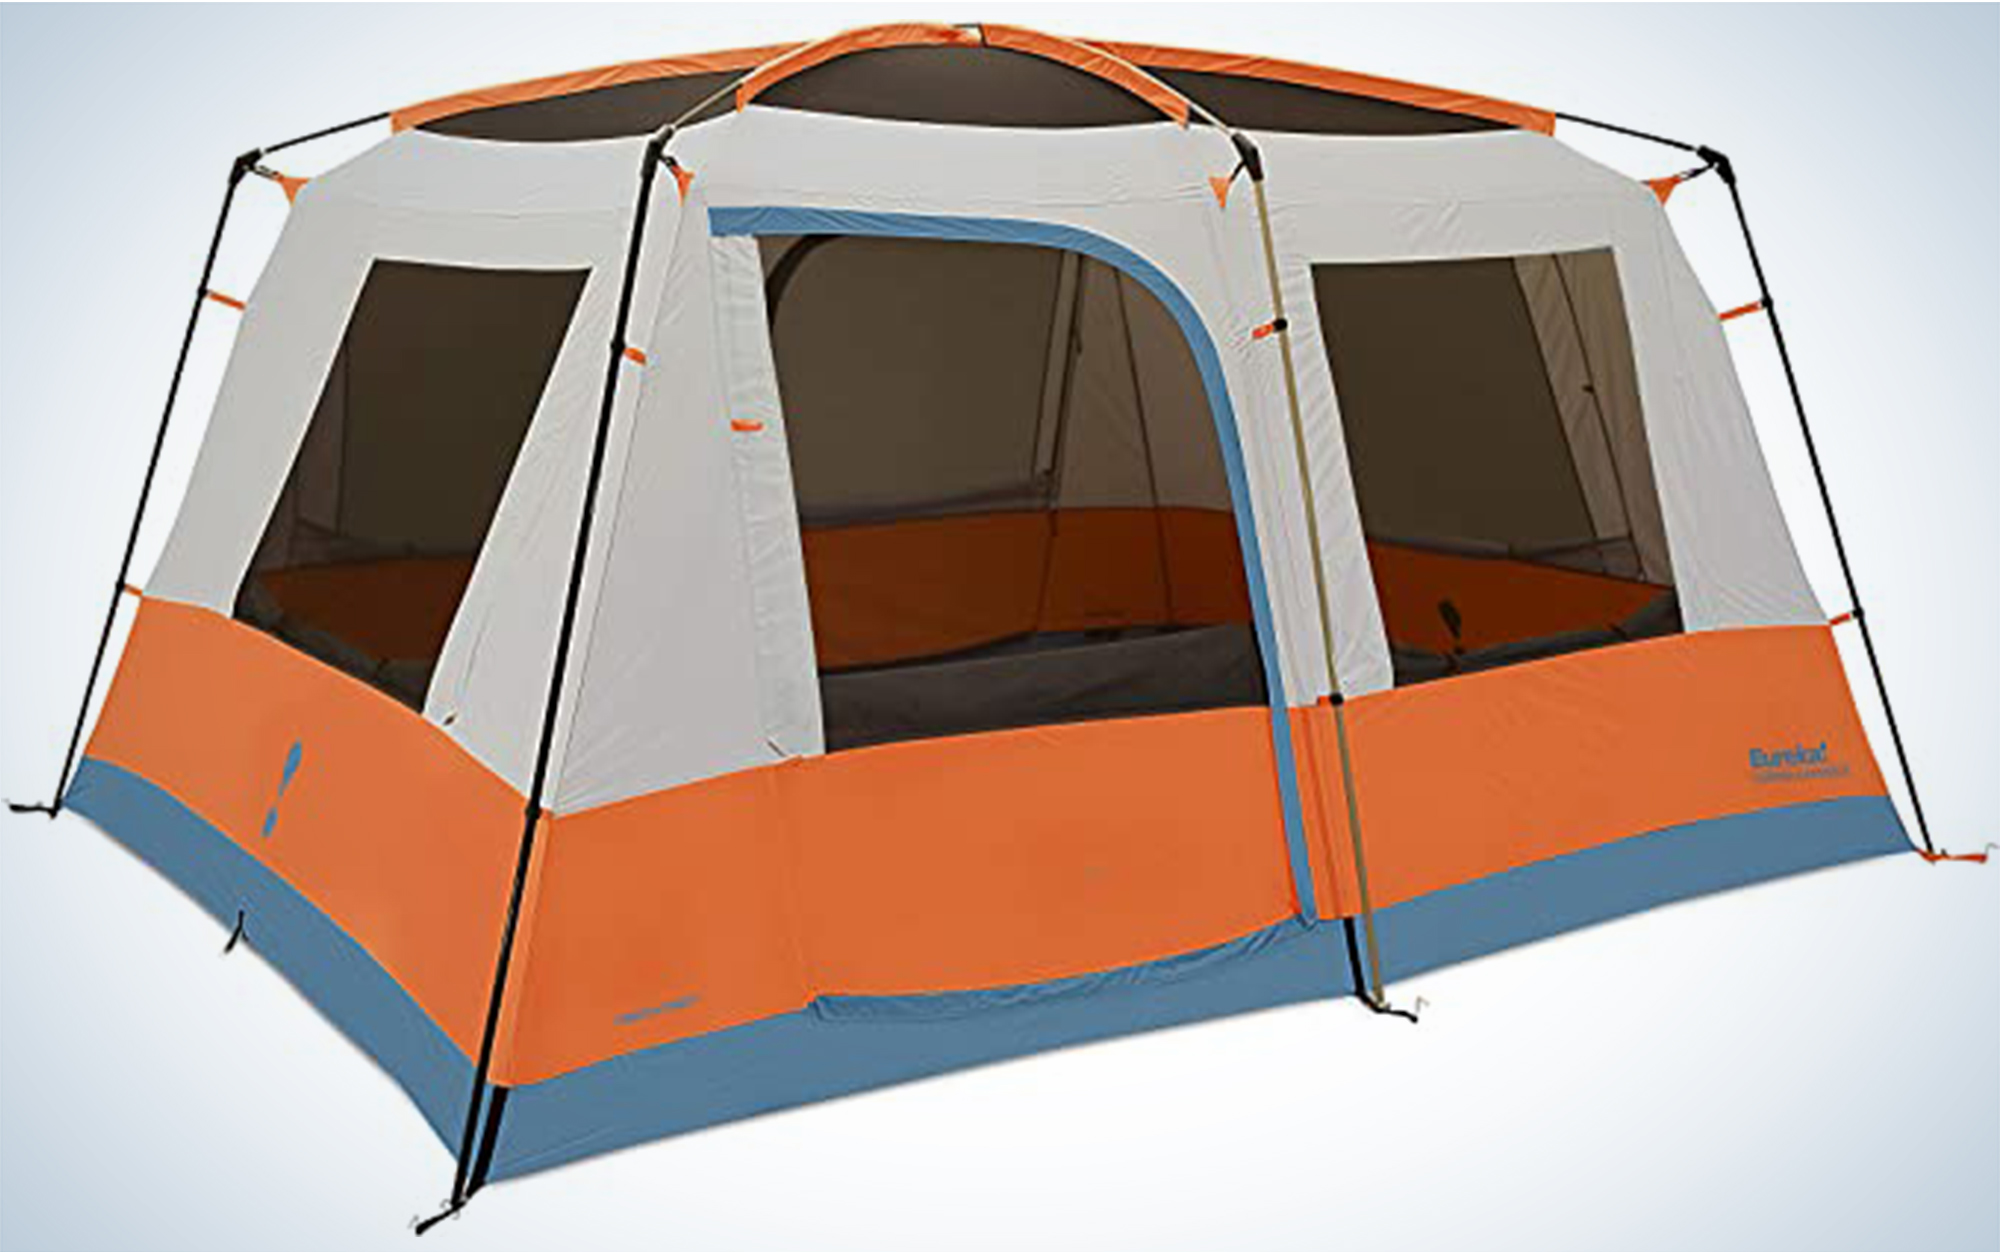 The Eureka Copper Canyon LX8 is one of the best camping tents.